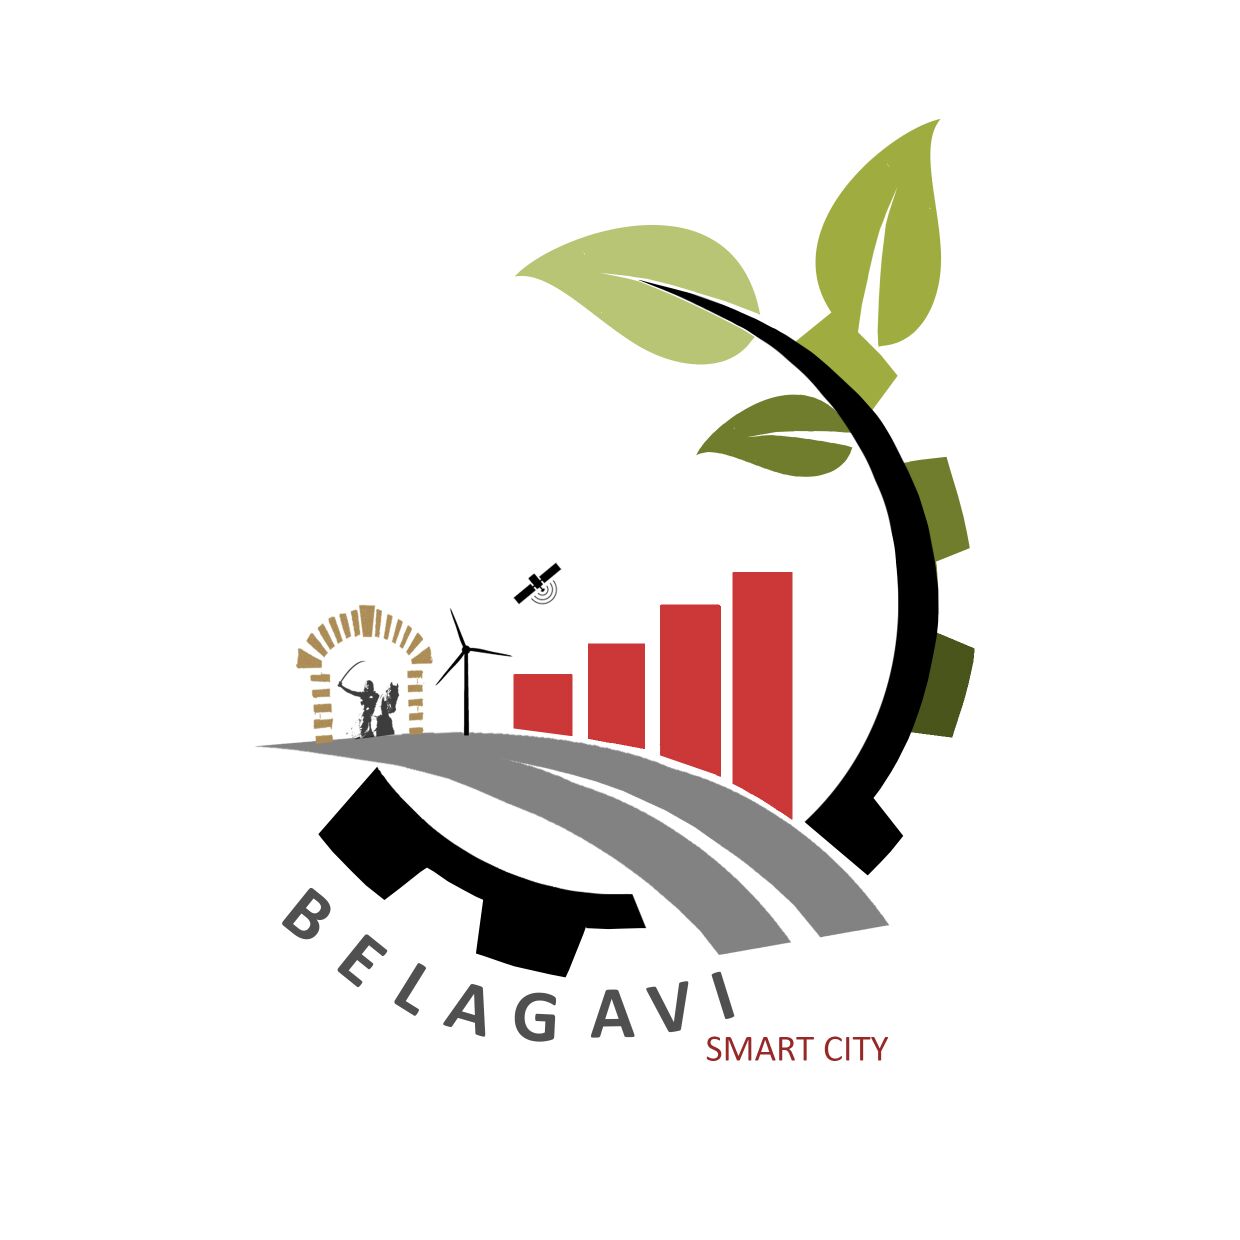 Tender Floated For Roof Top Solar Power Projects On Seven Government Buildings In Belagavi